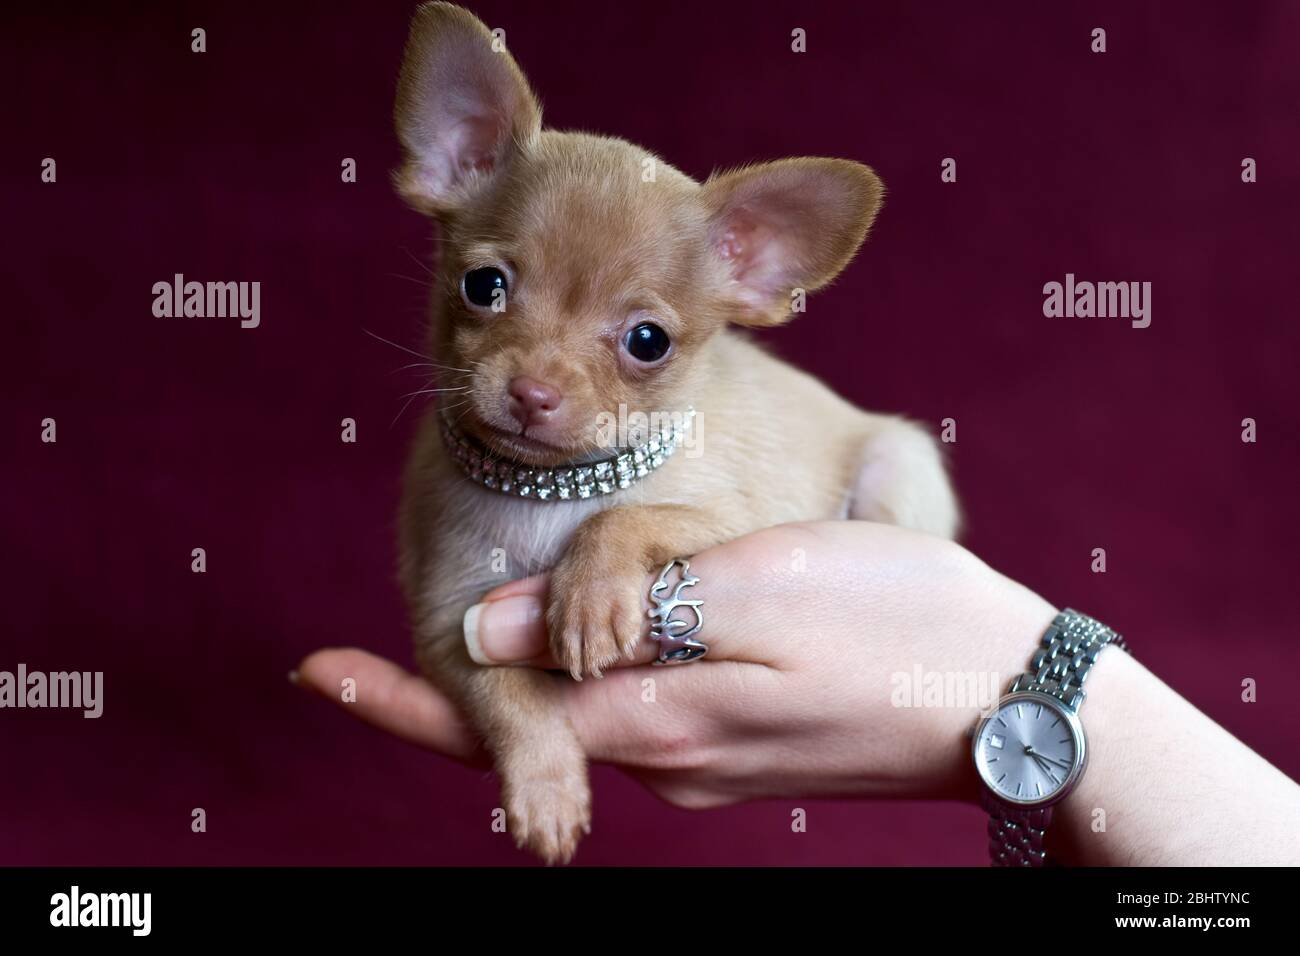 Short-haired Russkiy toy (Russian toy terrier) puppy on hand Stock Photo -  Alamy